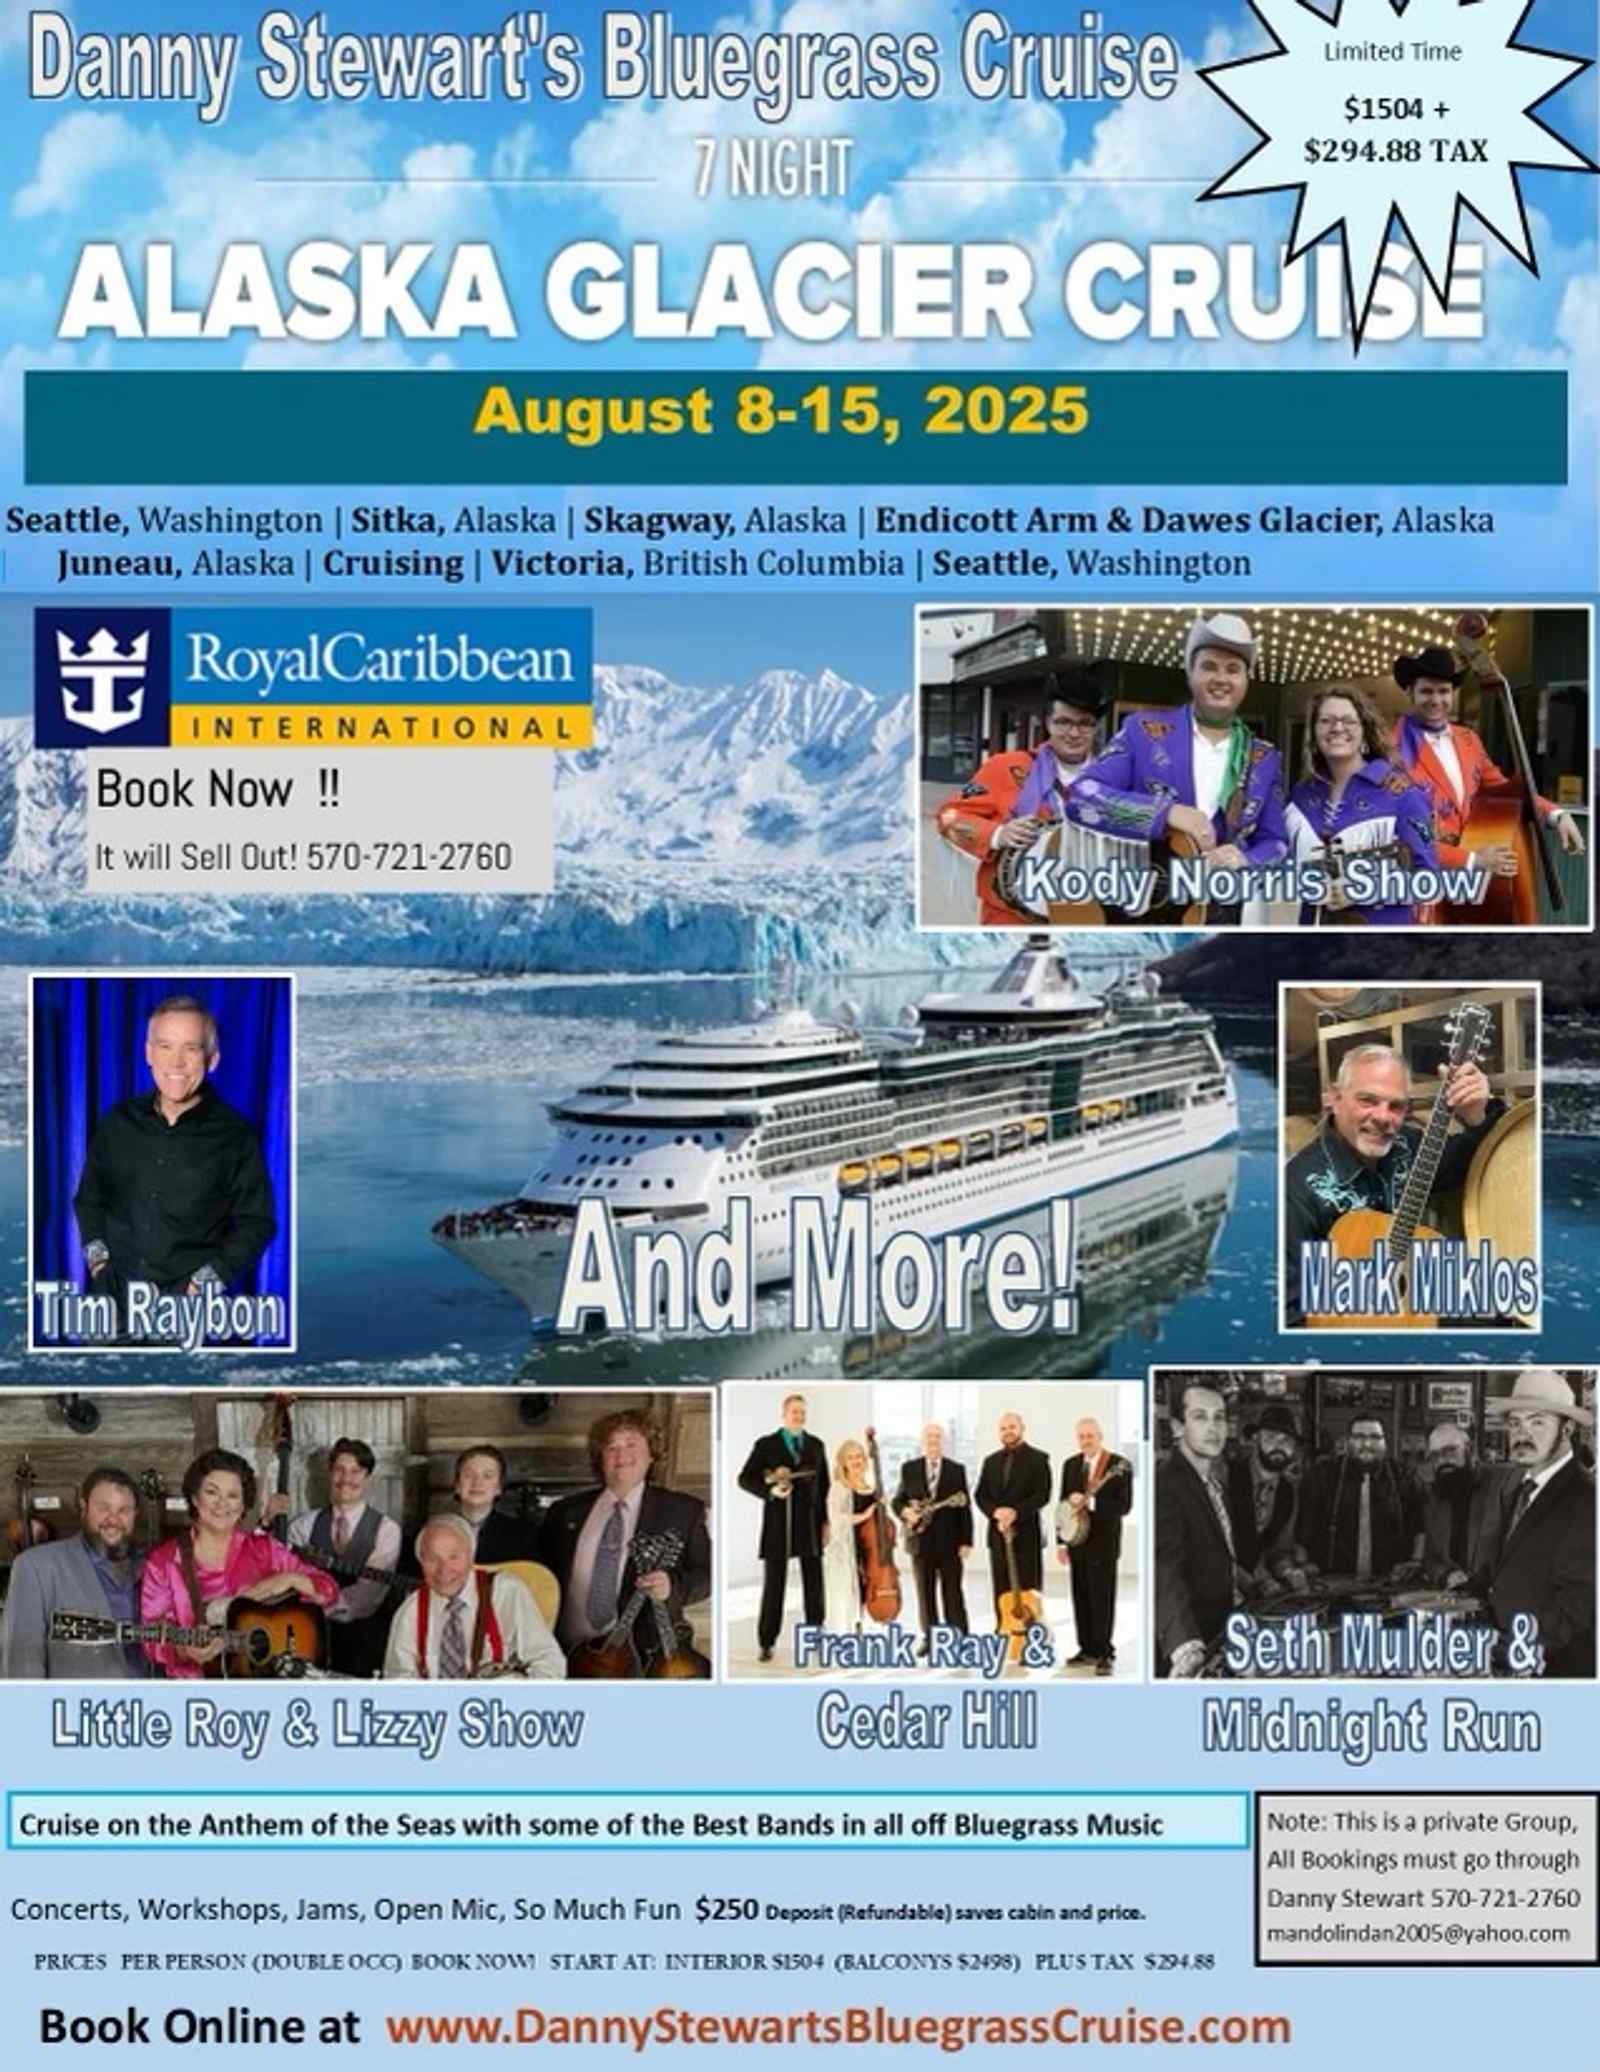 Danny Stewart's Bluegrass Cruise to Alaska's Glaciers featuring The Kody Norris Show!